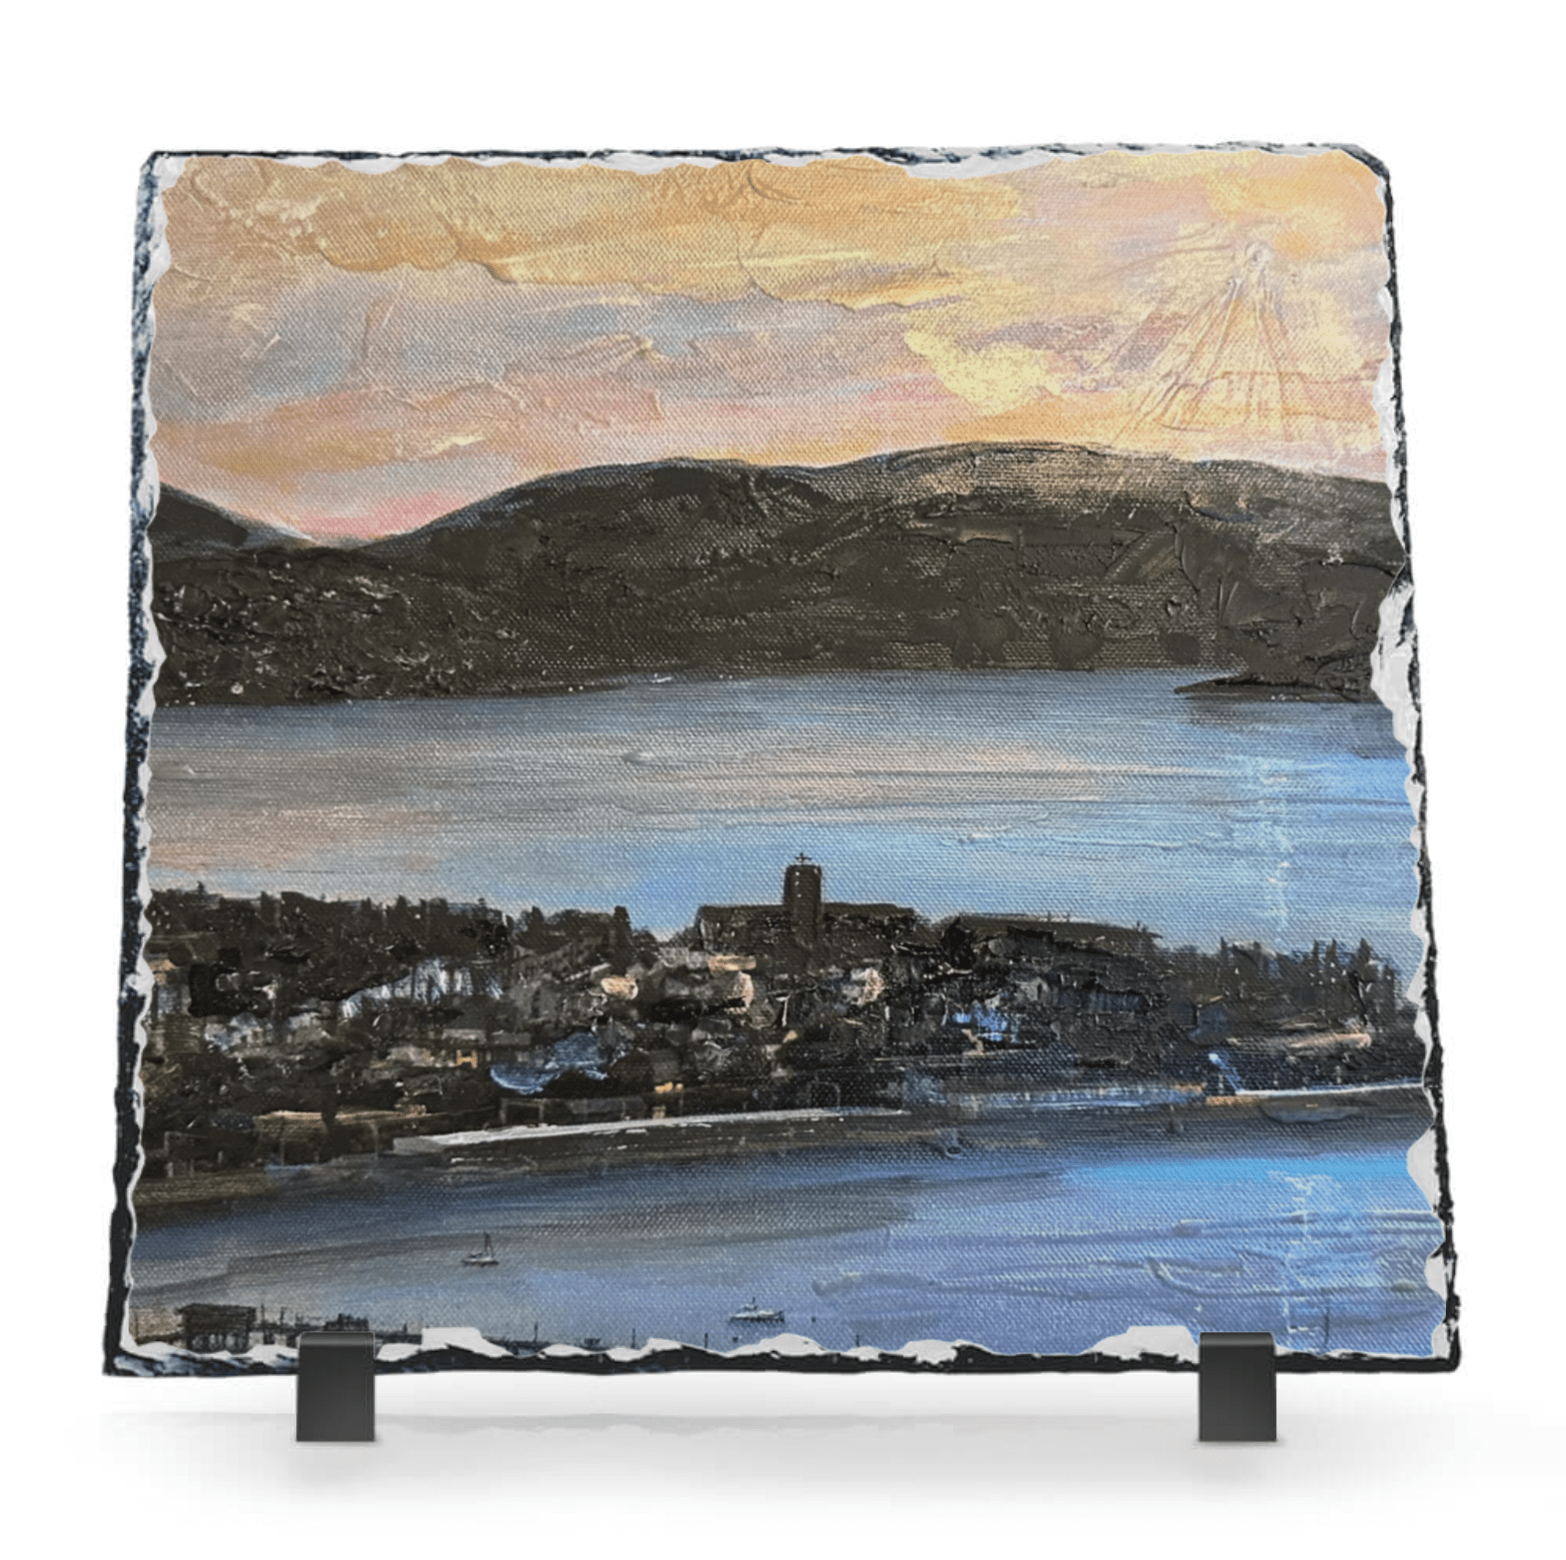 From Lyle Hill Scottish Slate Art-Slate Art-River Clyde Art Gallery-Paintings, Prints, Homeware, Art Gifts From Scotland By Scottish Artist Kevin Hunter